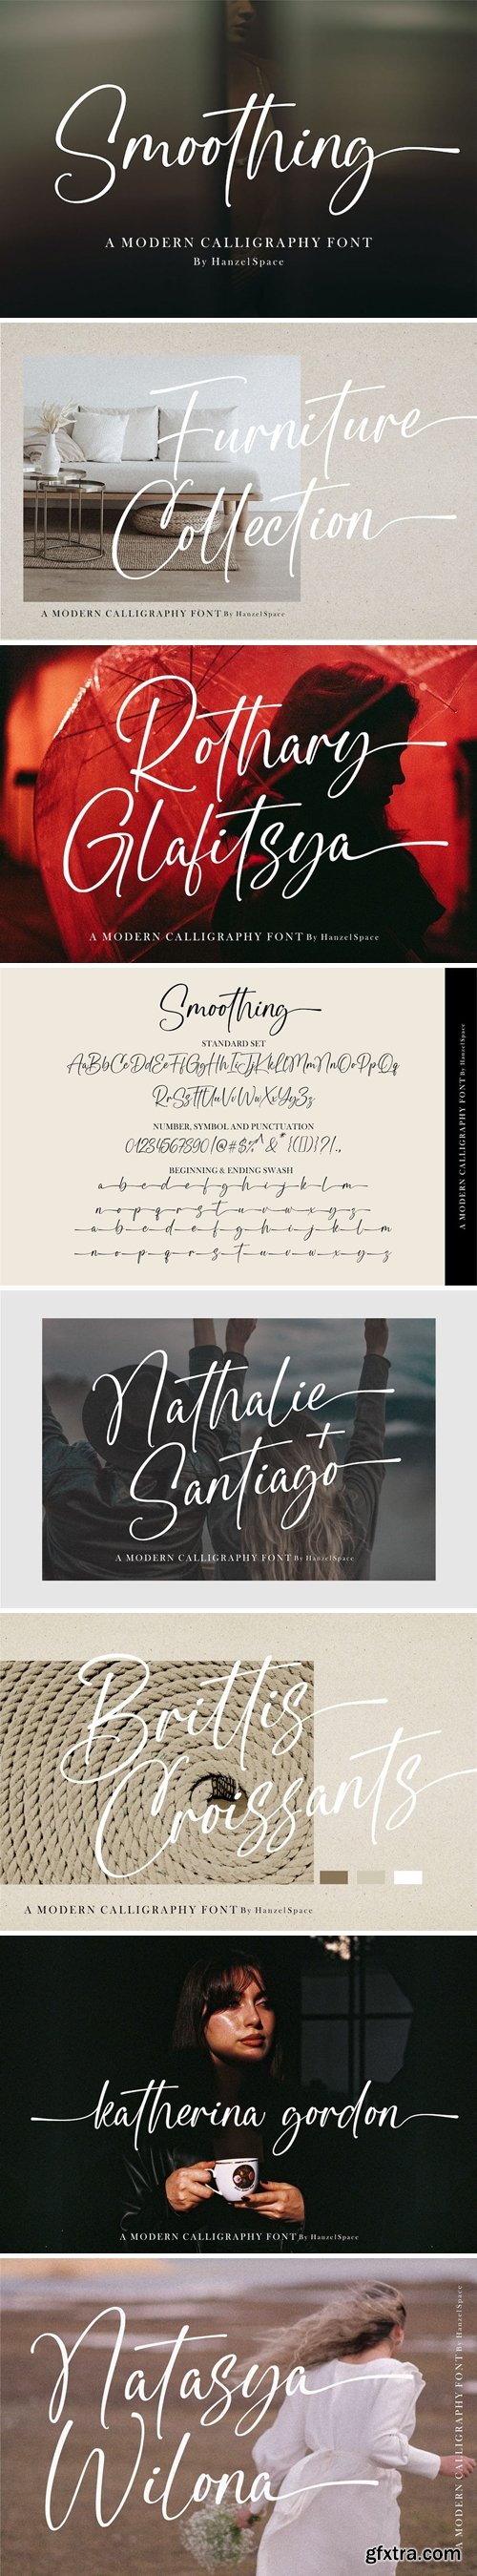 Smoothing - Modern Calligraphy Font